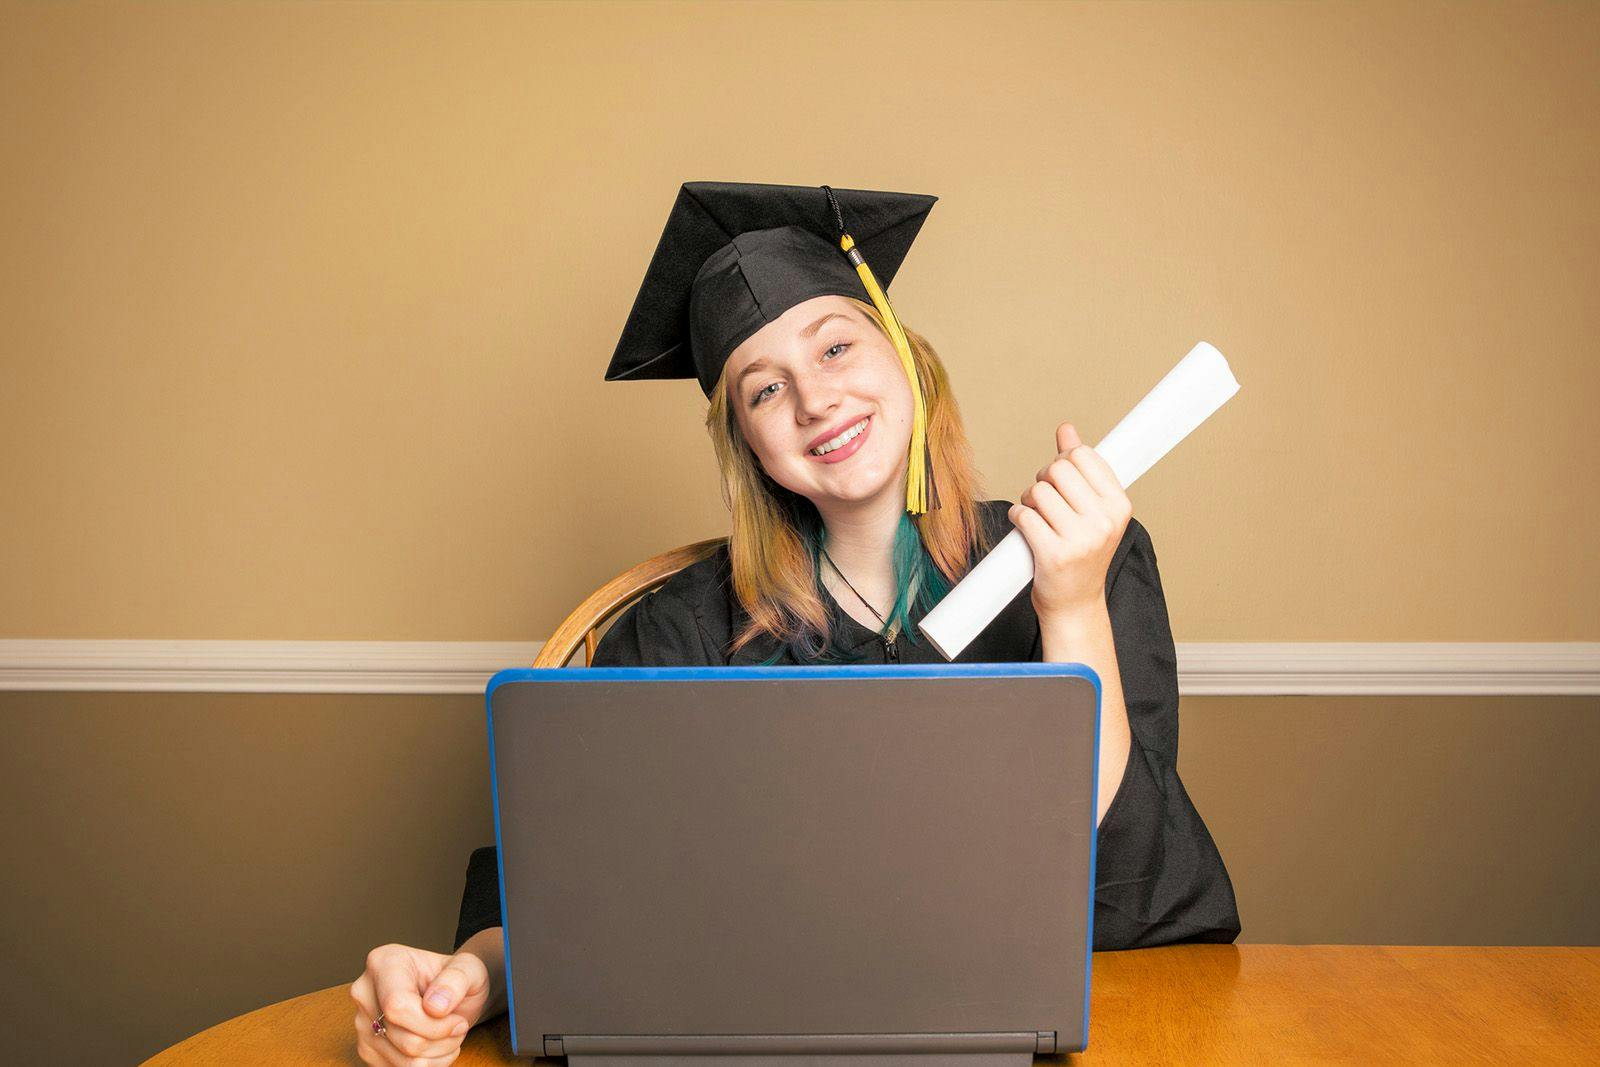 Online Degrees Have Gained Respect in the Professional World